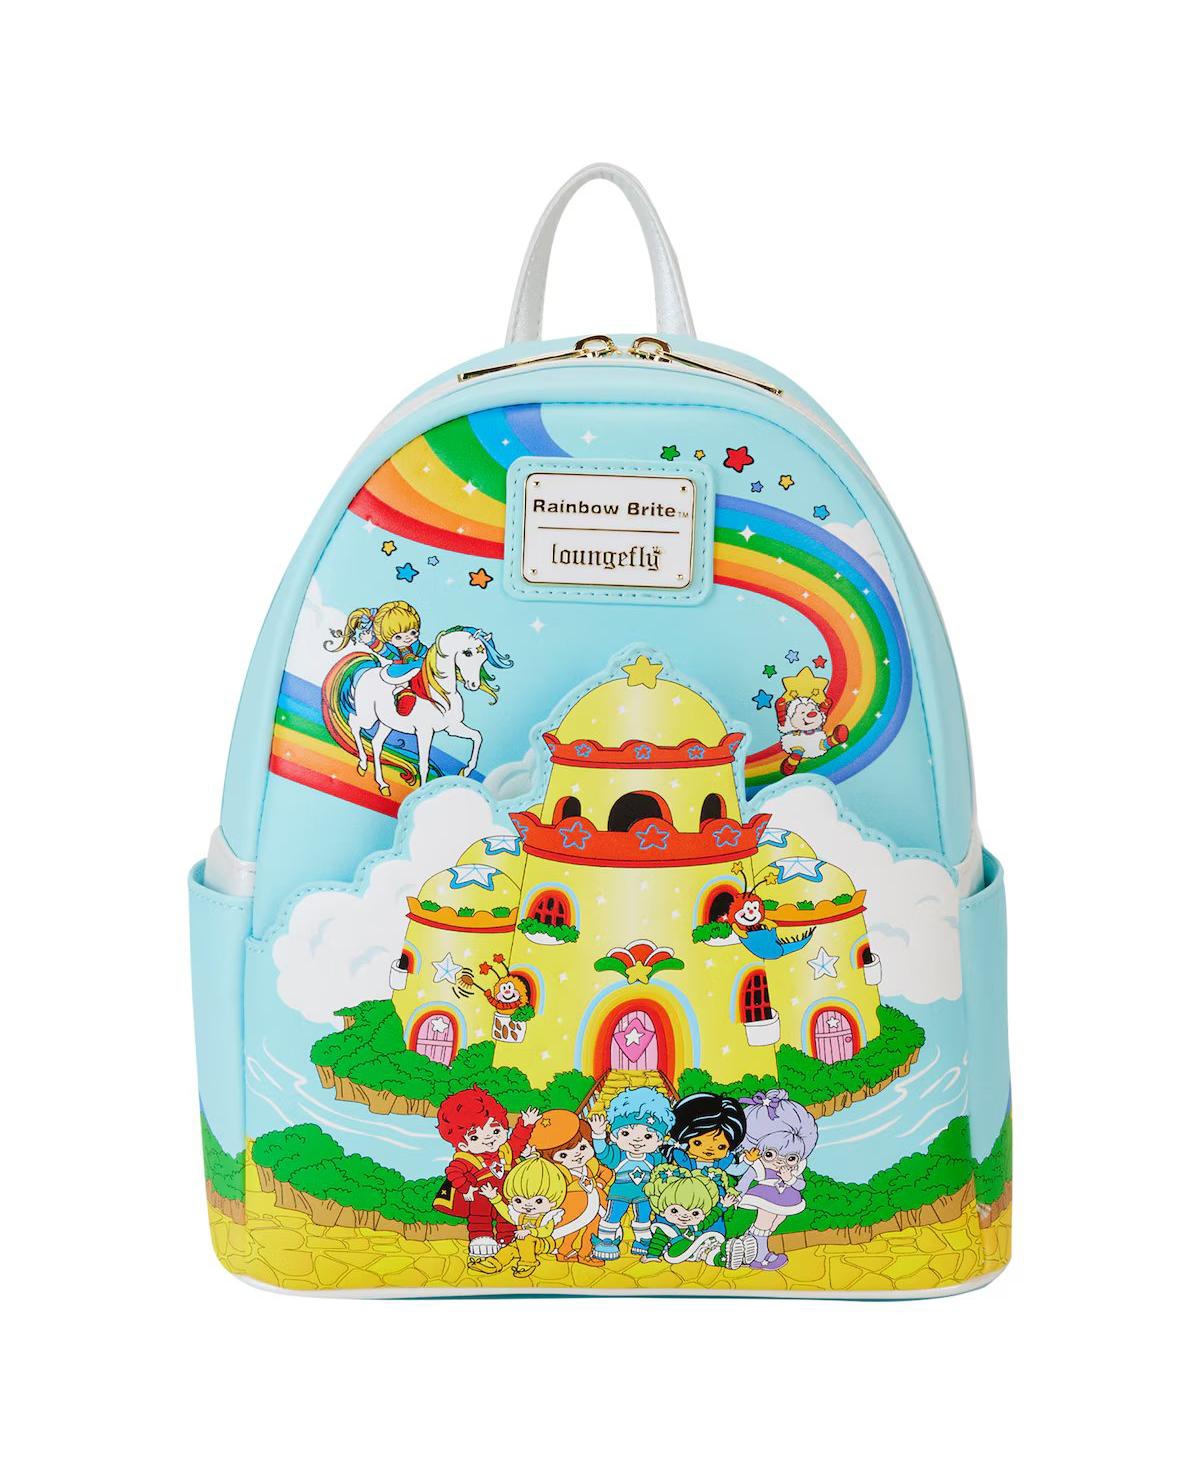 Loungefly Rainbow Brite Color Castle Mini Backpack In Blue